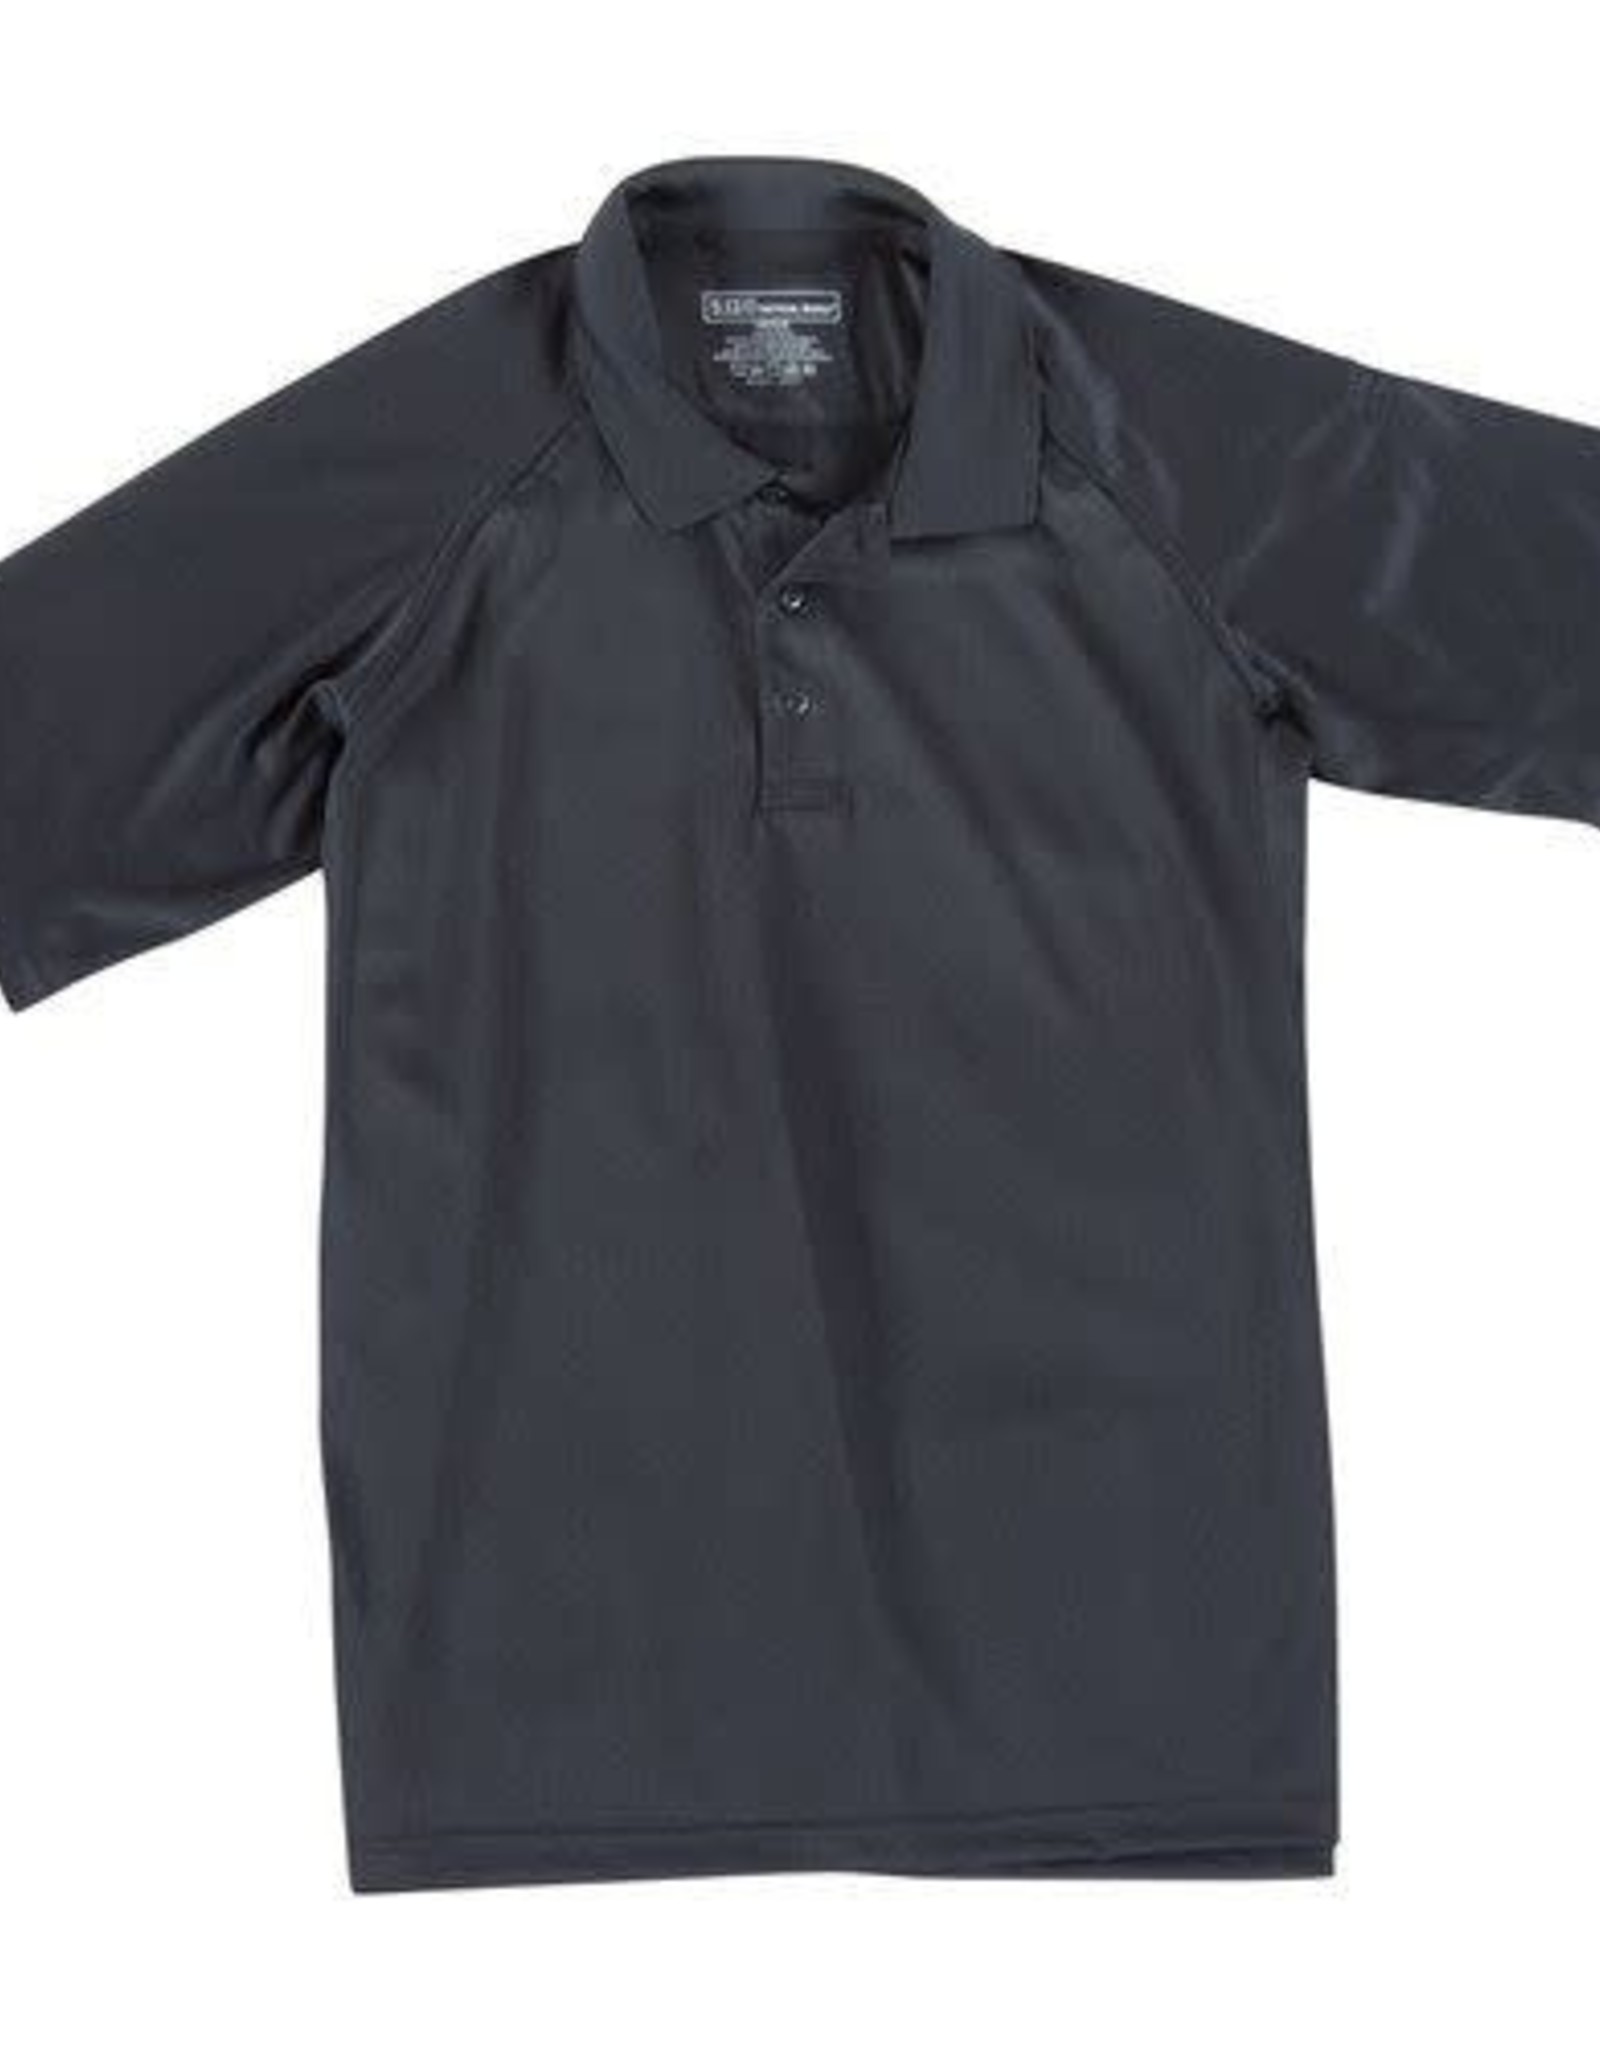 5.11 Tactical Performance S/S Polo